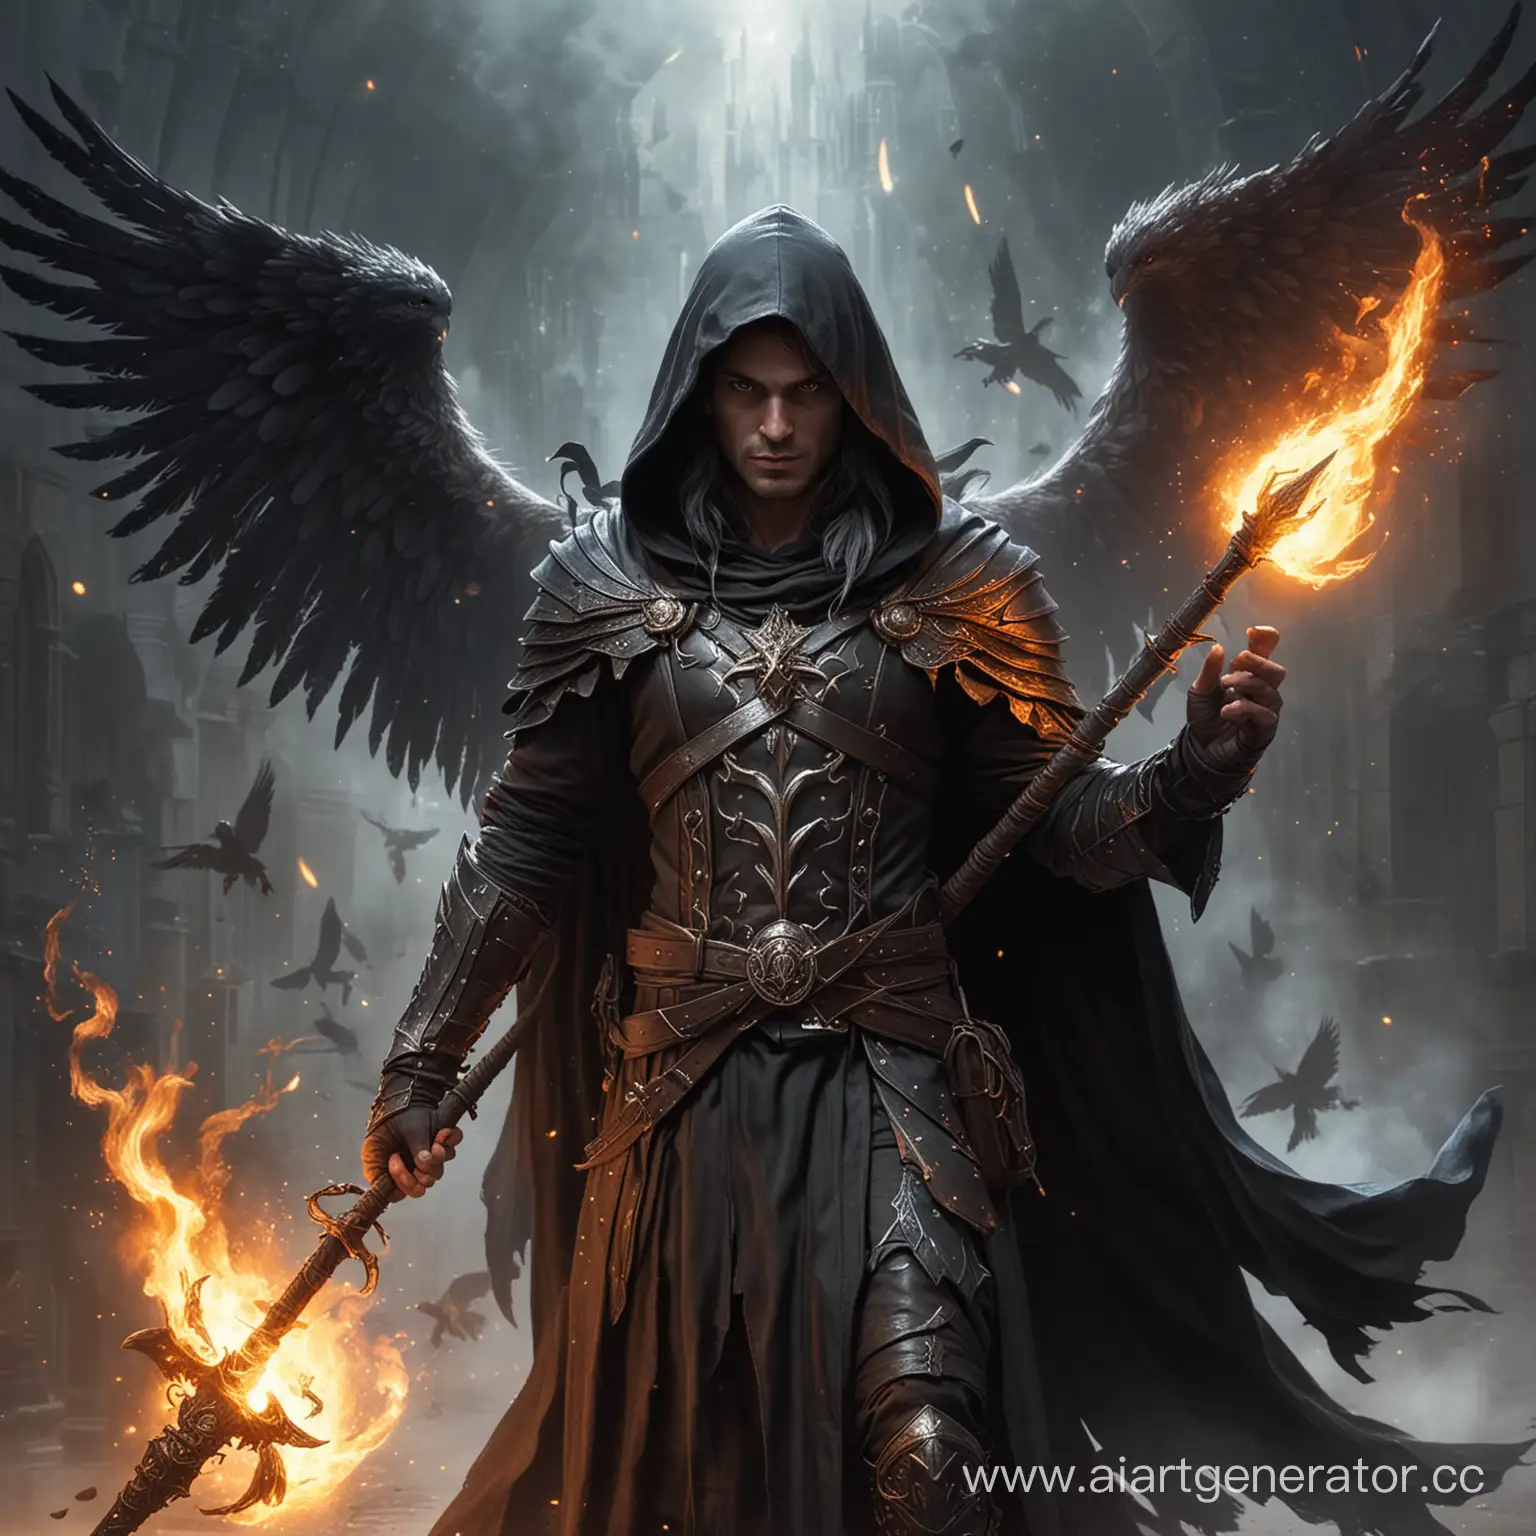 Mysterious-Aasimar-Magician-with-Fiery-Staff-and-Ethereal-Wings